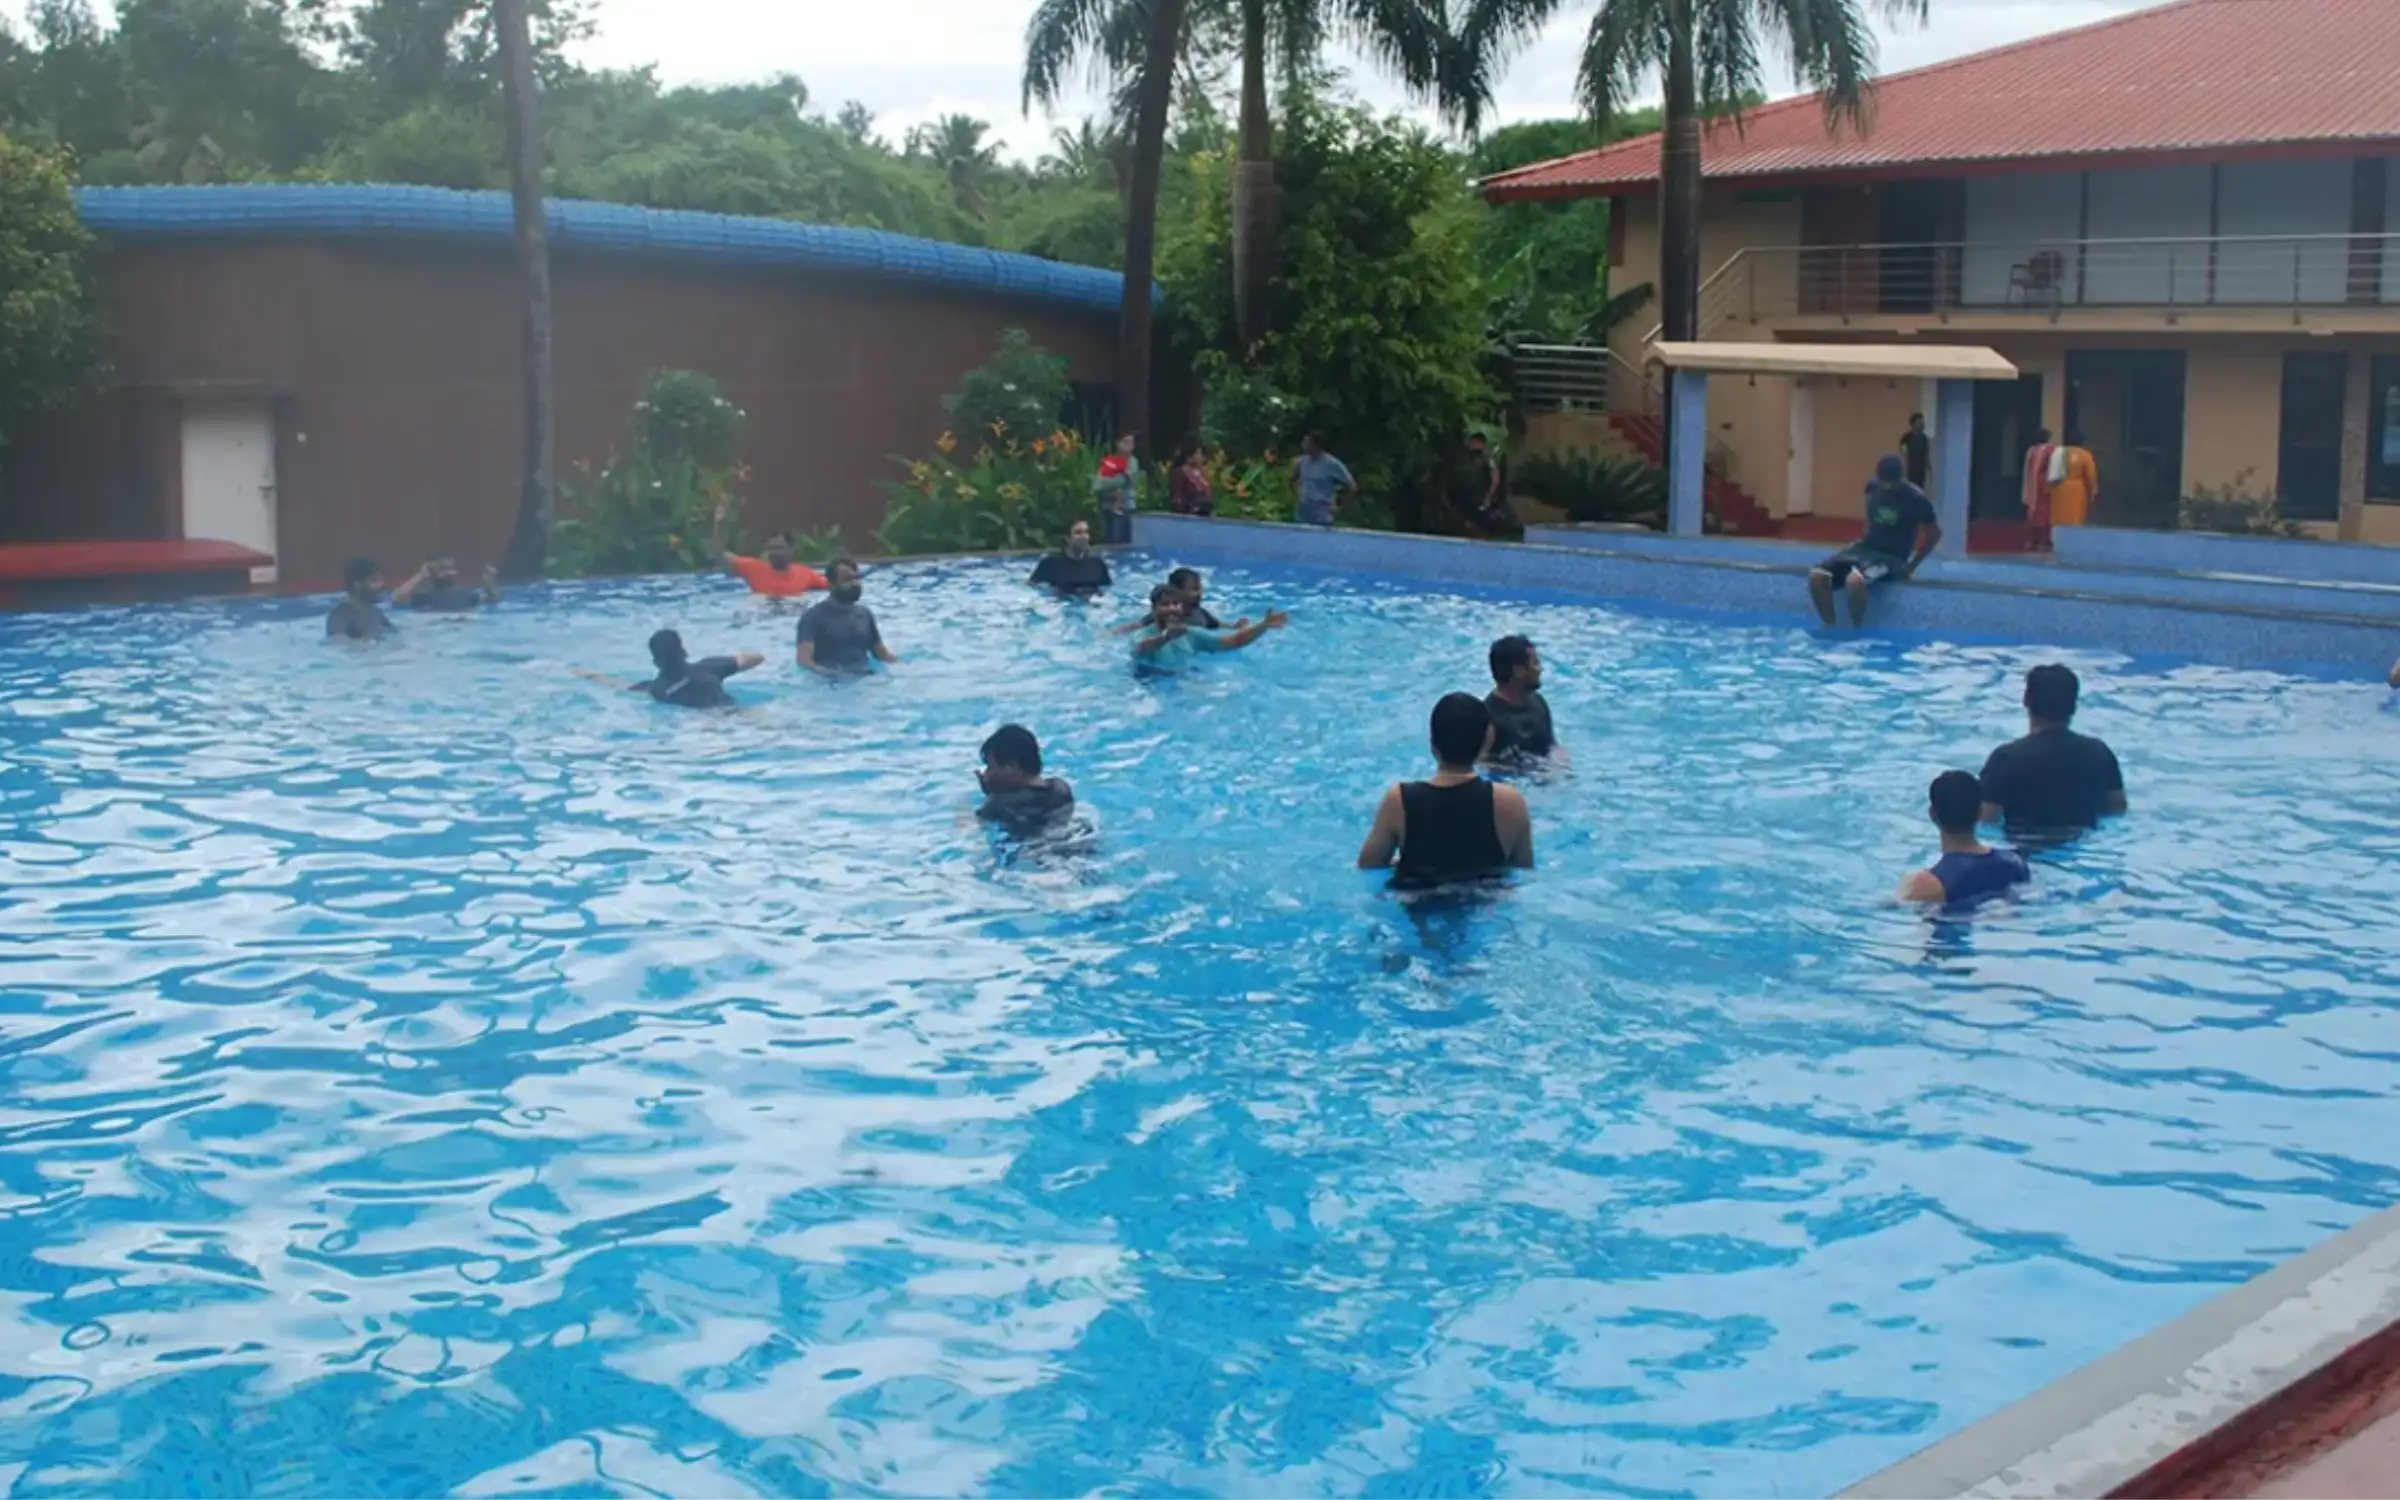 Day Outing Package in Elim Resort, Bangalore